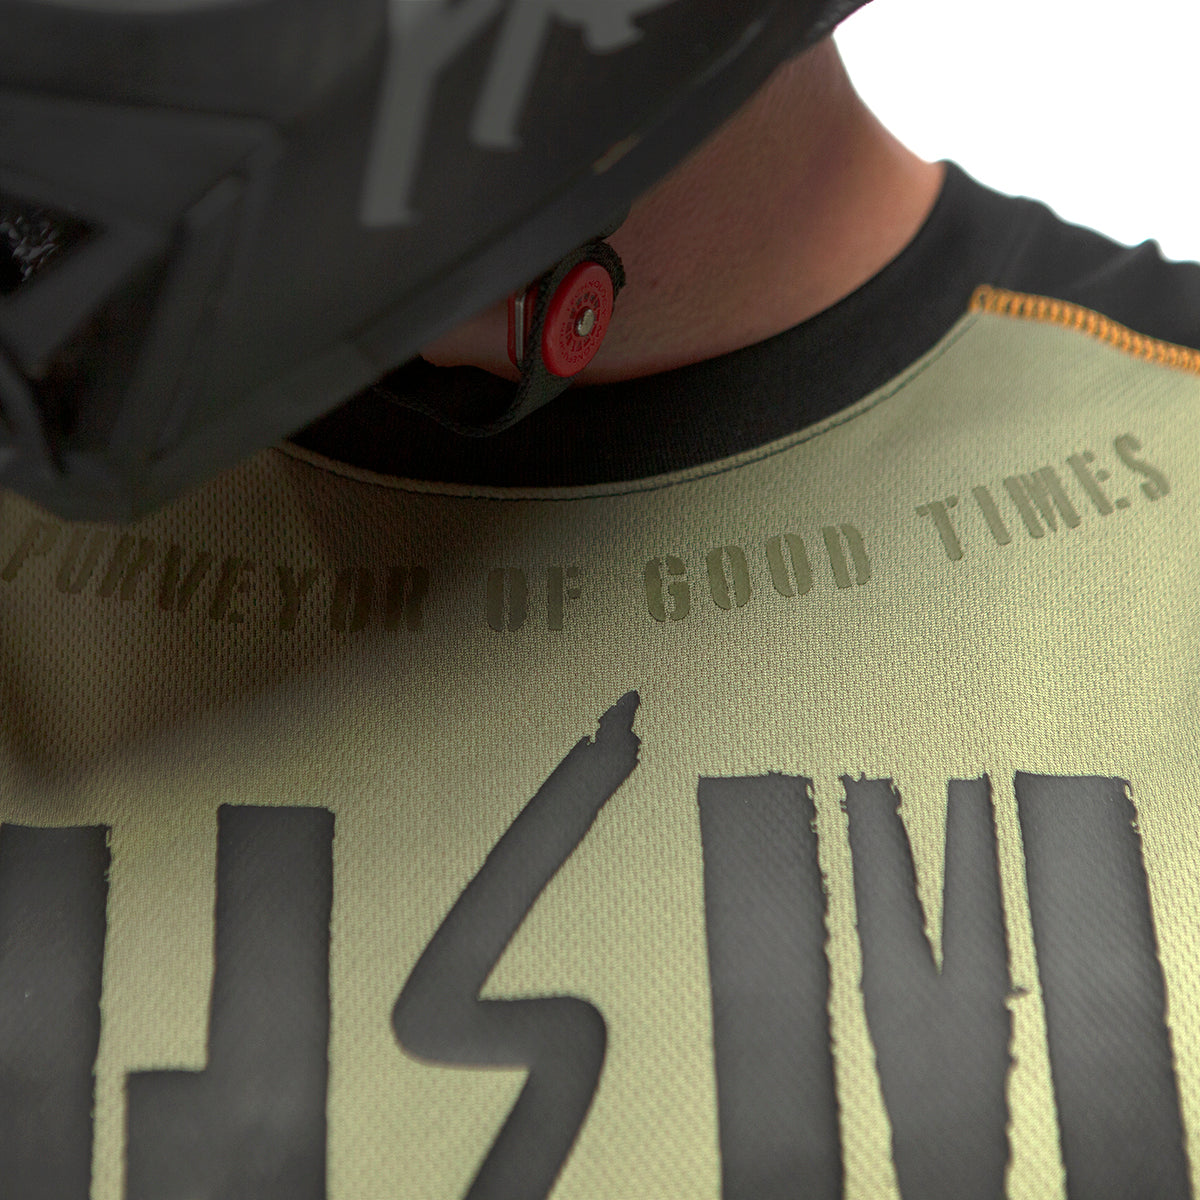 Off-Road Grindhouse Charge Jersey - Dusty Olive